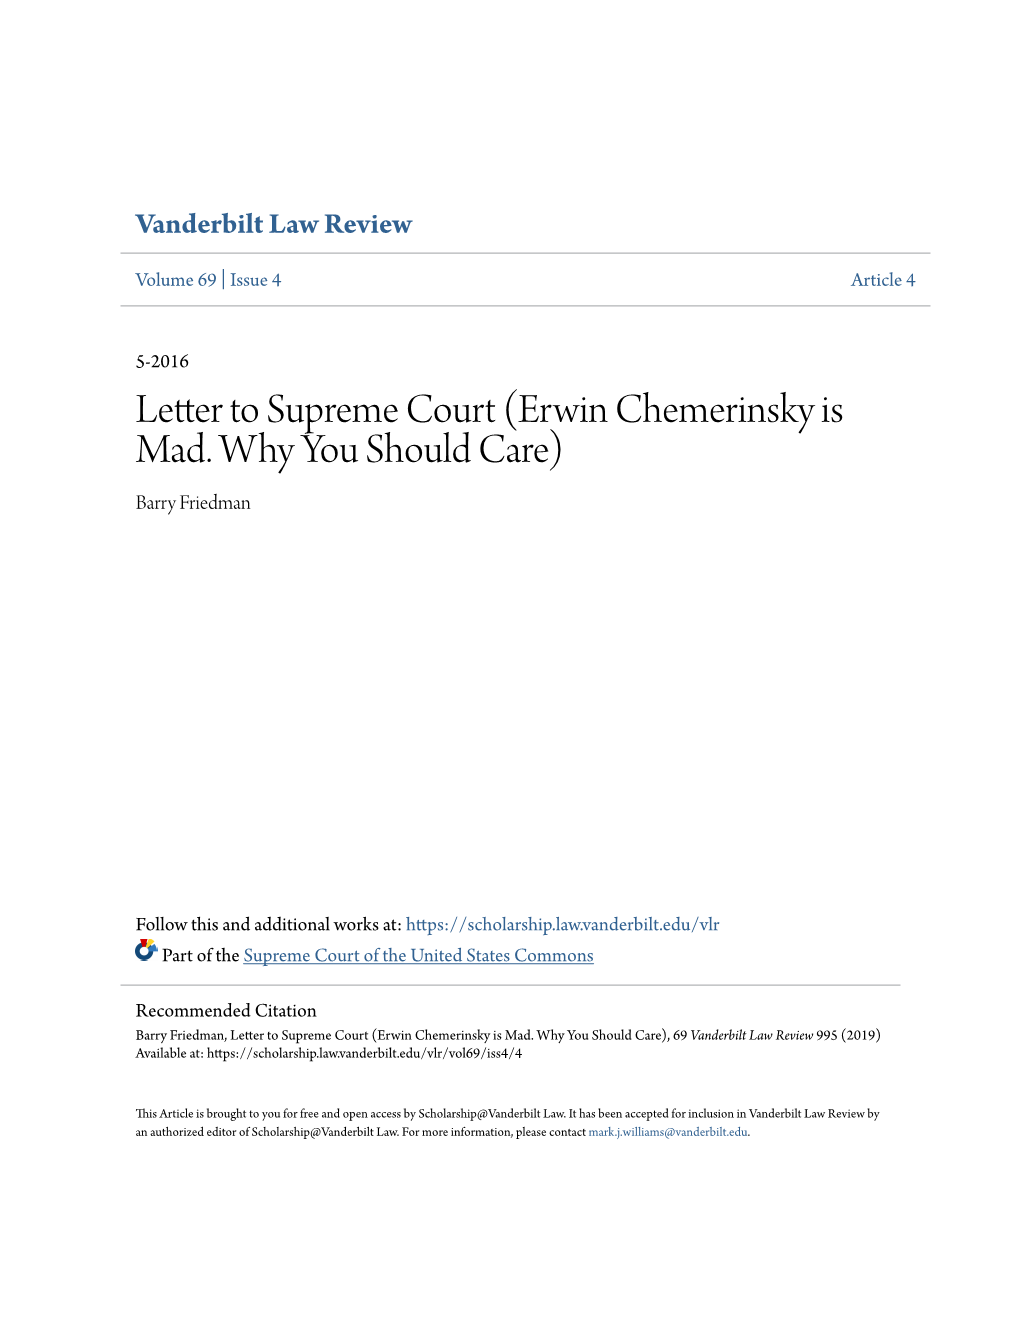 Letter to Supreme Court (Erwin Chemerinsky Is Mad. Why You Should Care) Barry Friedman